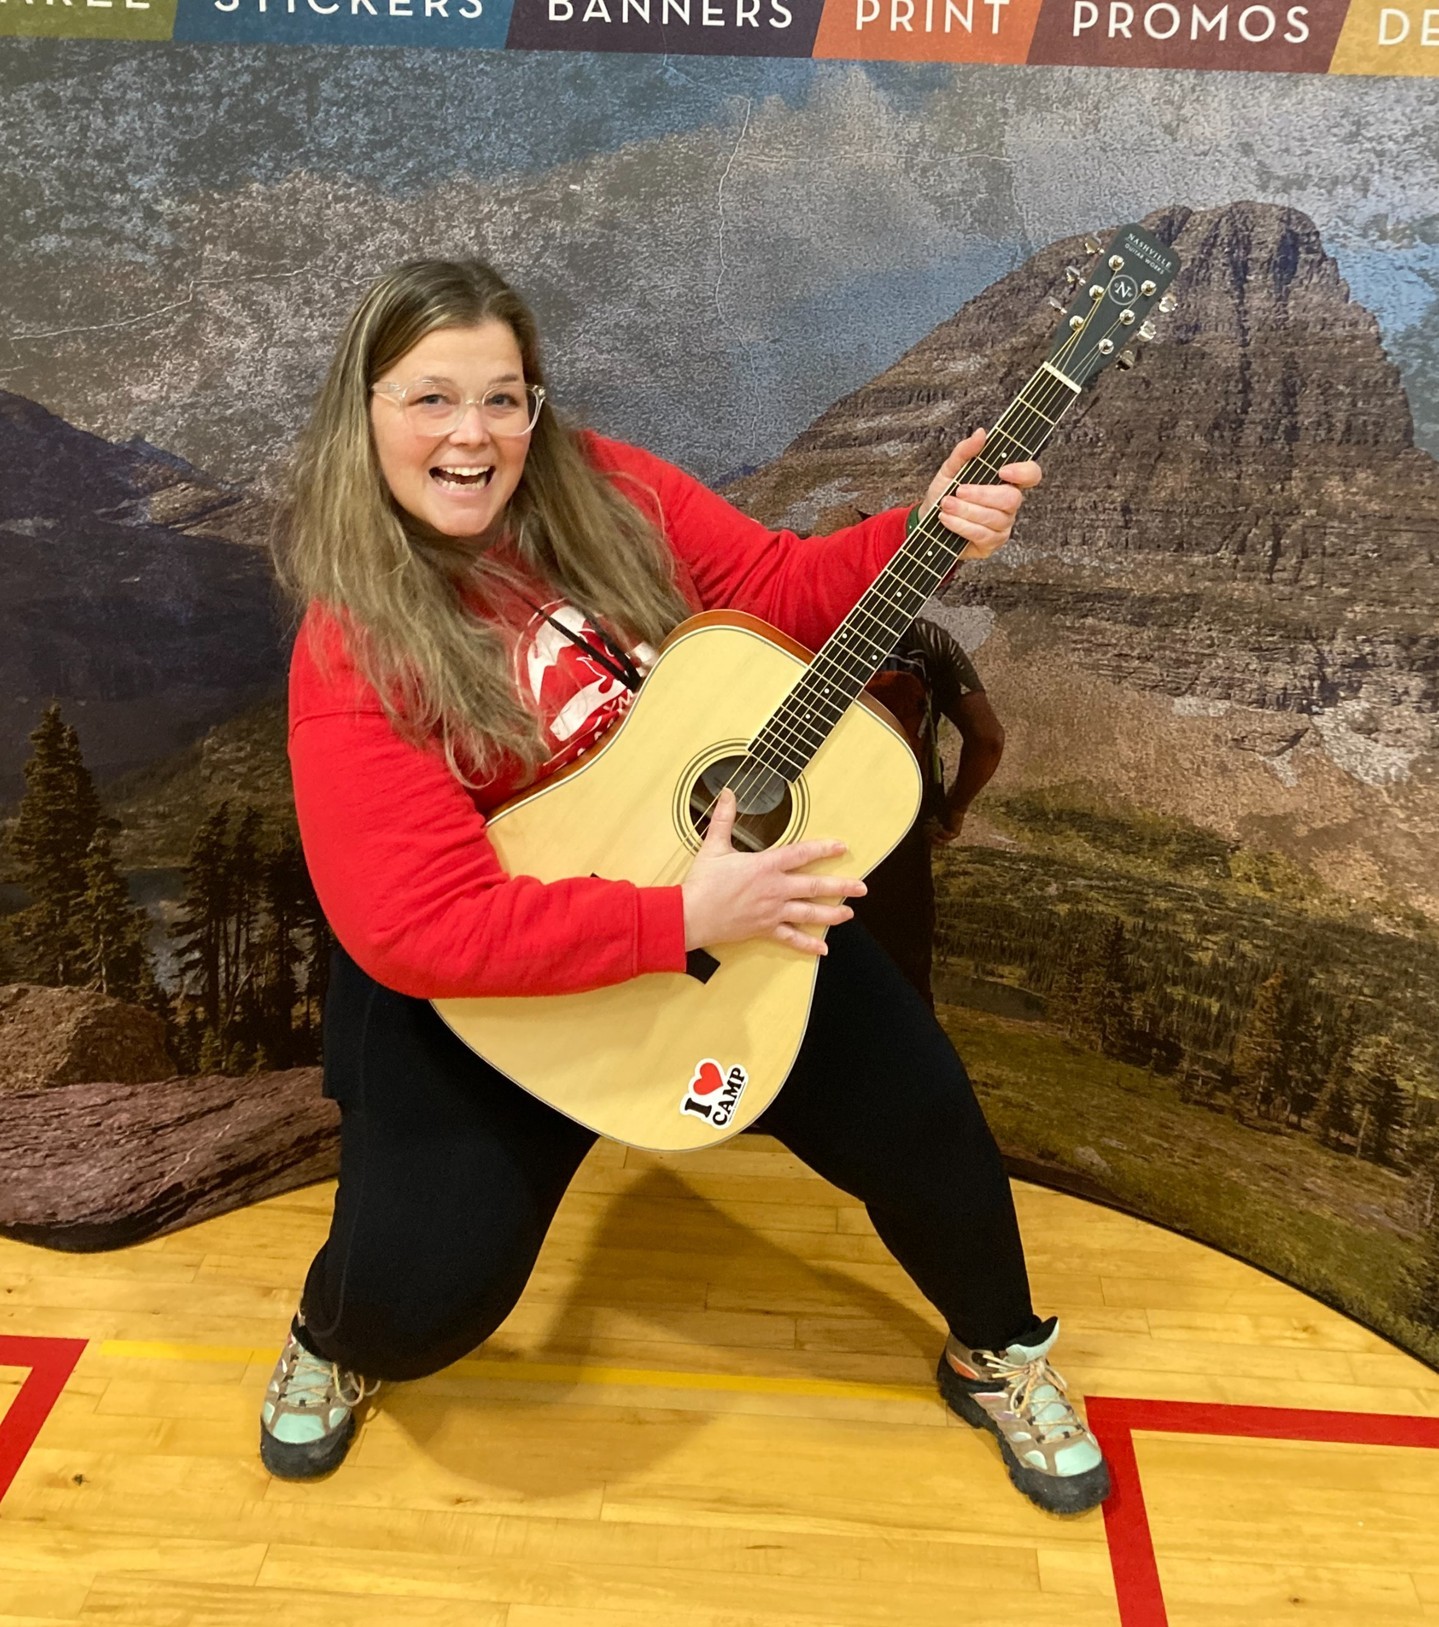 Congrats to Shannon from YMCA Camp Watia on winning the guitar giveaway at the YMCA MACC Michigan Conference. Check out our website and see how we can help elevate your brand.
https://loom.ly/TyGkFkA
 #ymcacamp #guitargiveaway #elevateyourbrand #ymca #winnerswin